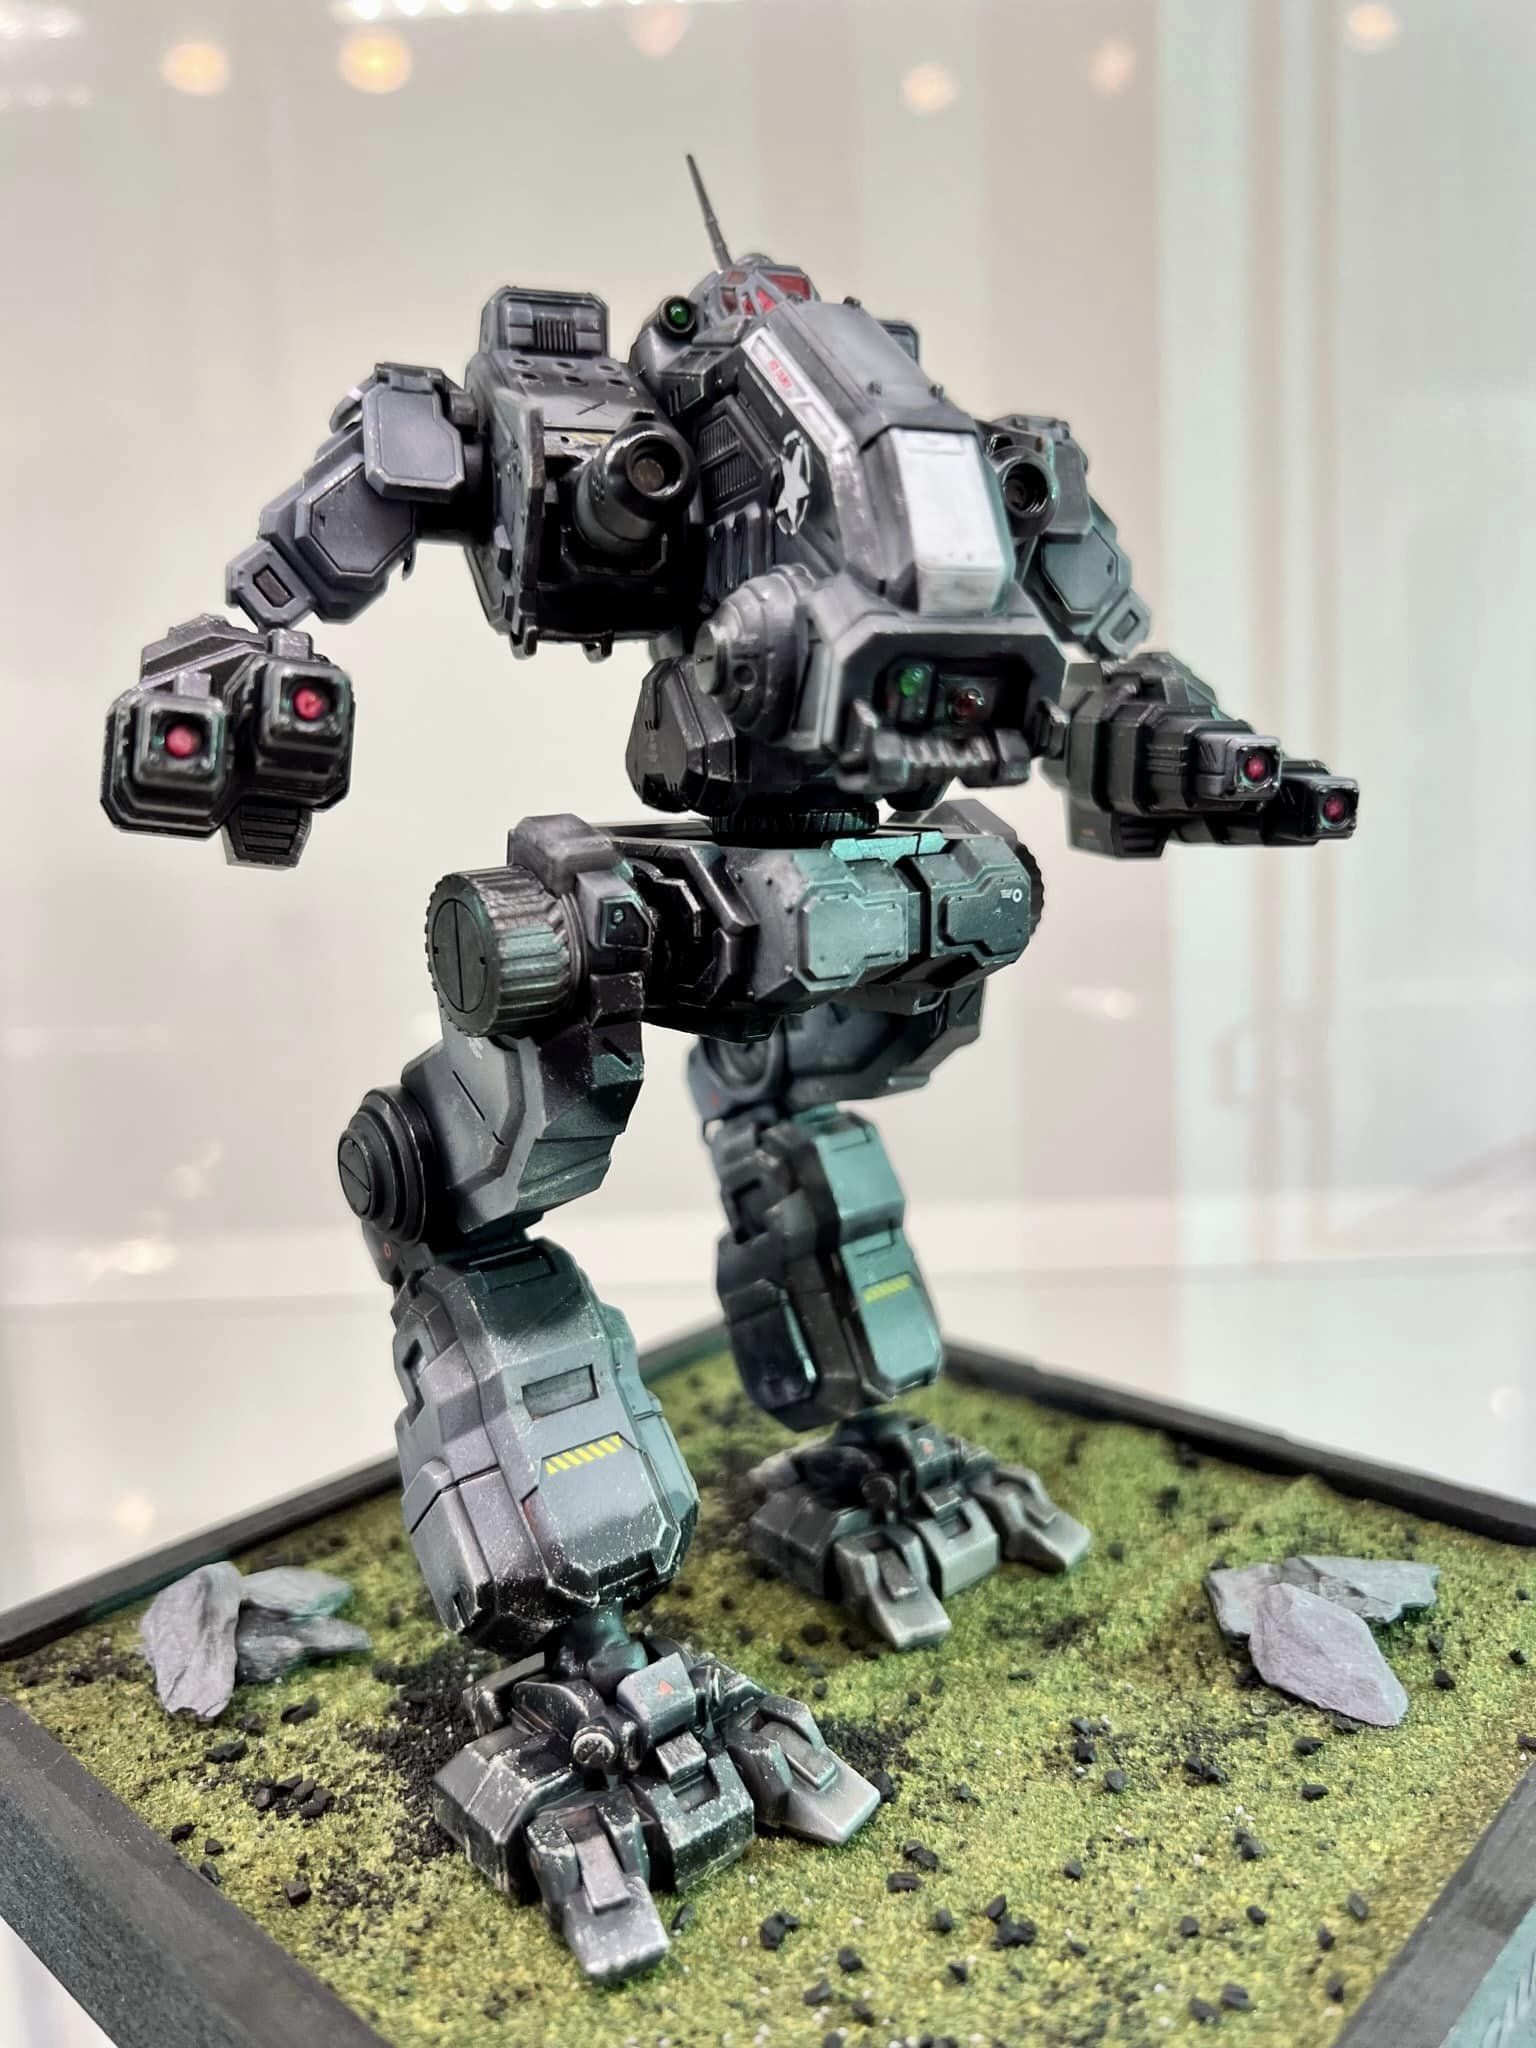 A 3D print of Vulture/Mad Dog from the Mechwarrior/Battletech